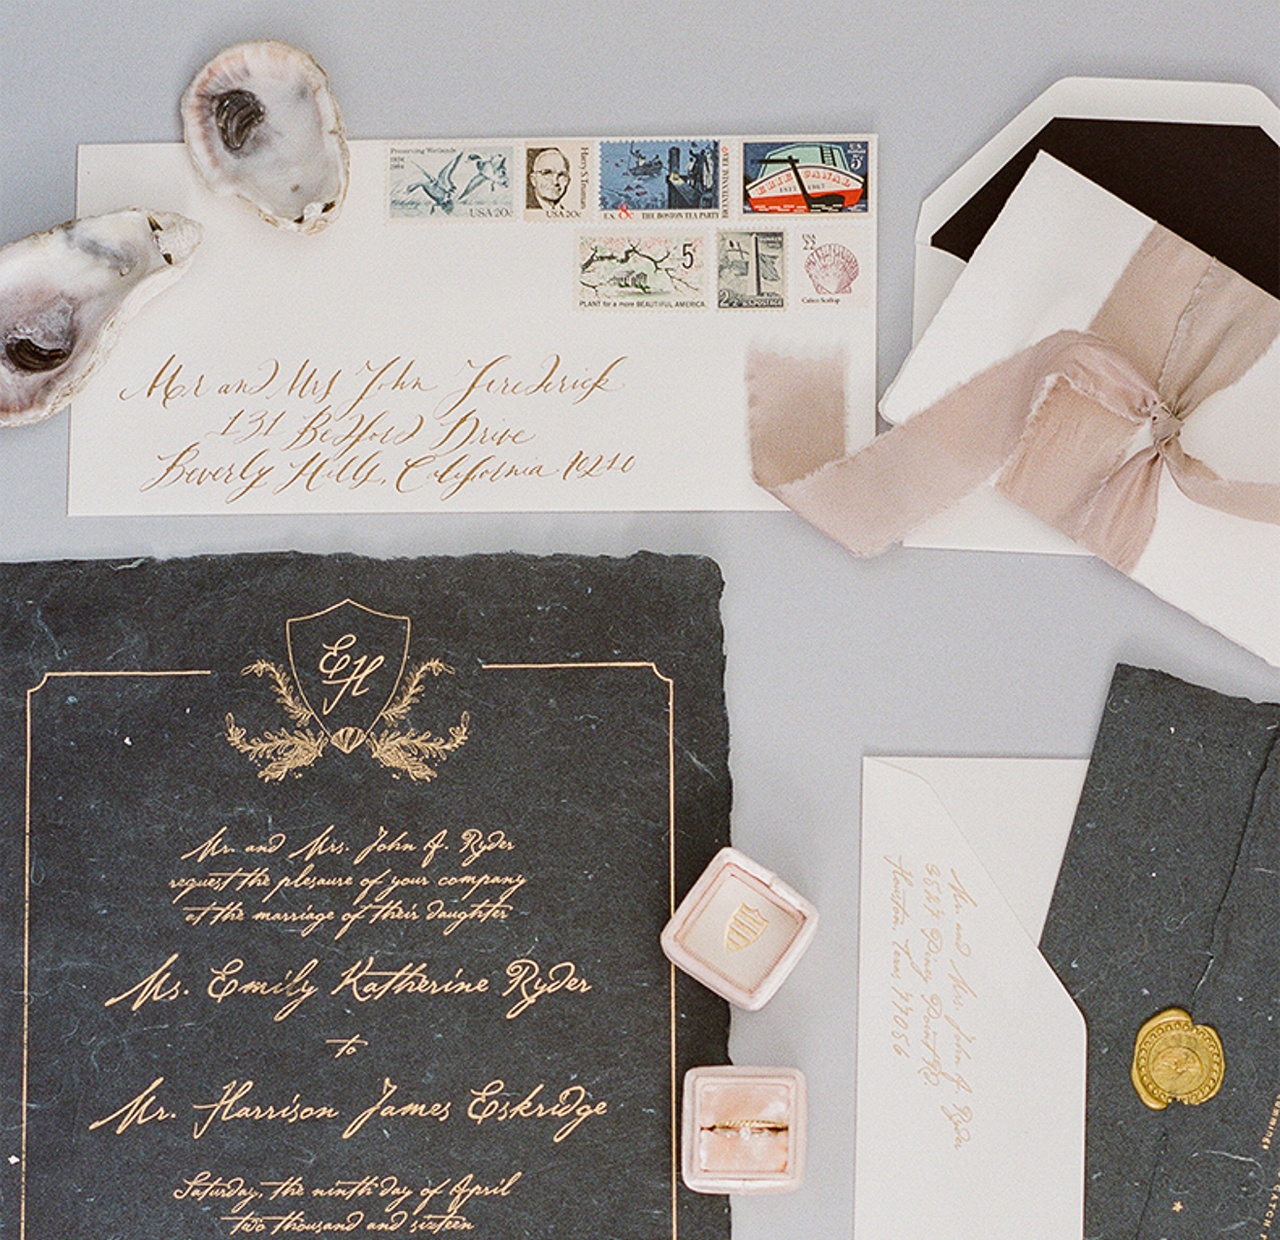 Best Wedding Invitations of 2016: Romantic Shipwreck-Inspired Calligraphy Wedding Invitations with Deckled Edges by Poste and Co.